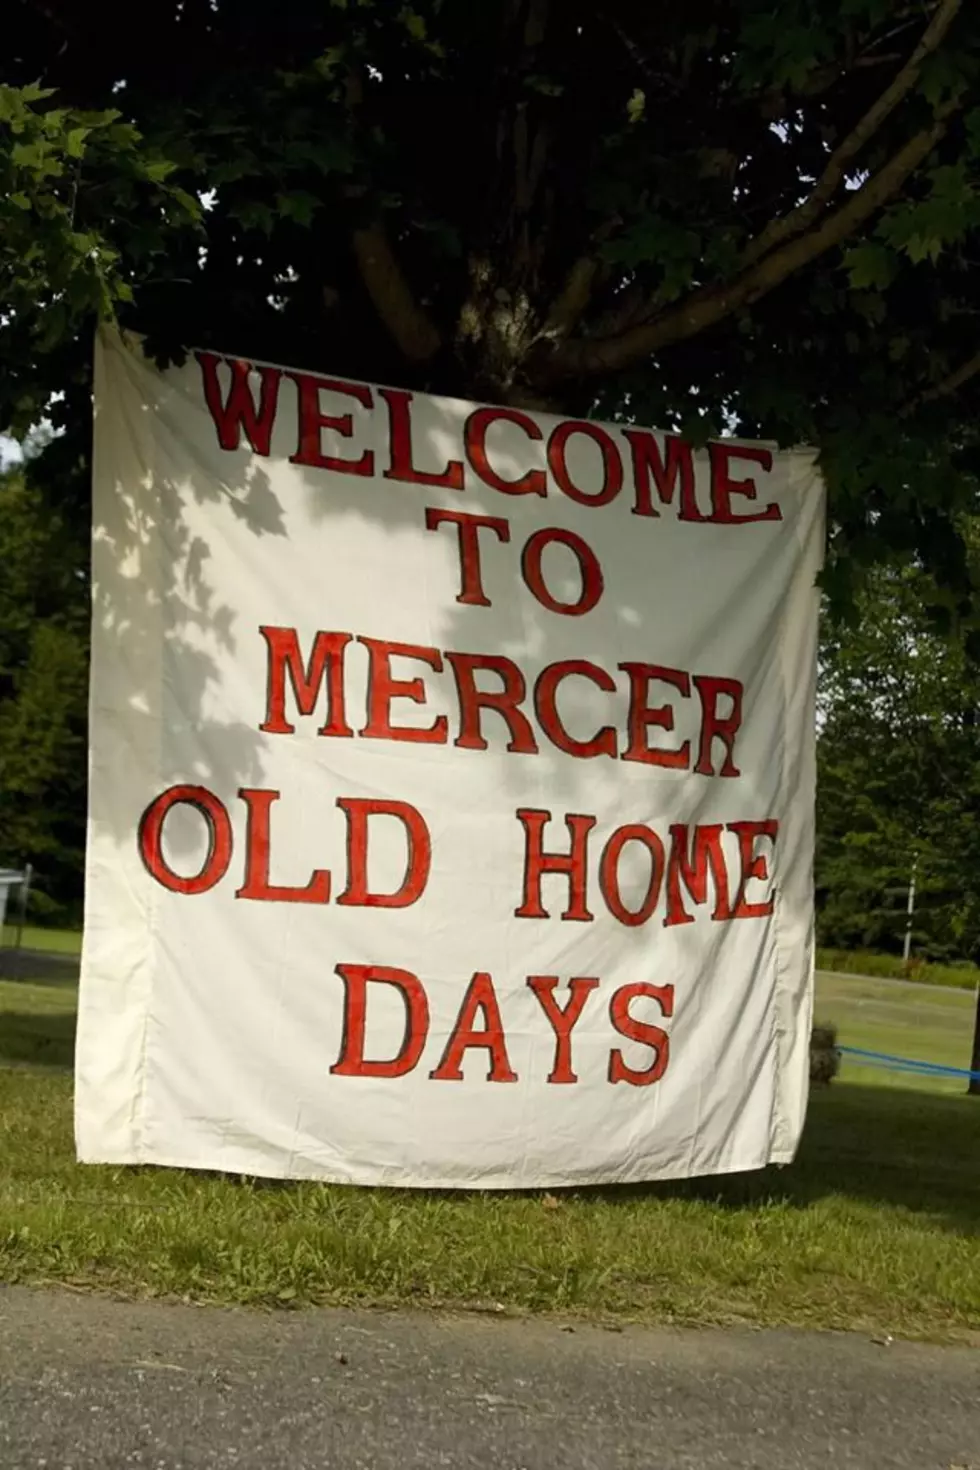 Mercer Old Home Days Are This Weekend